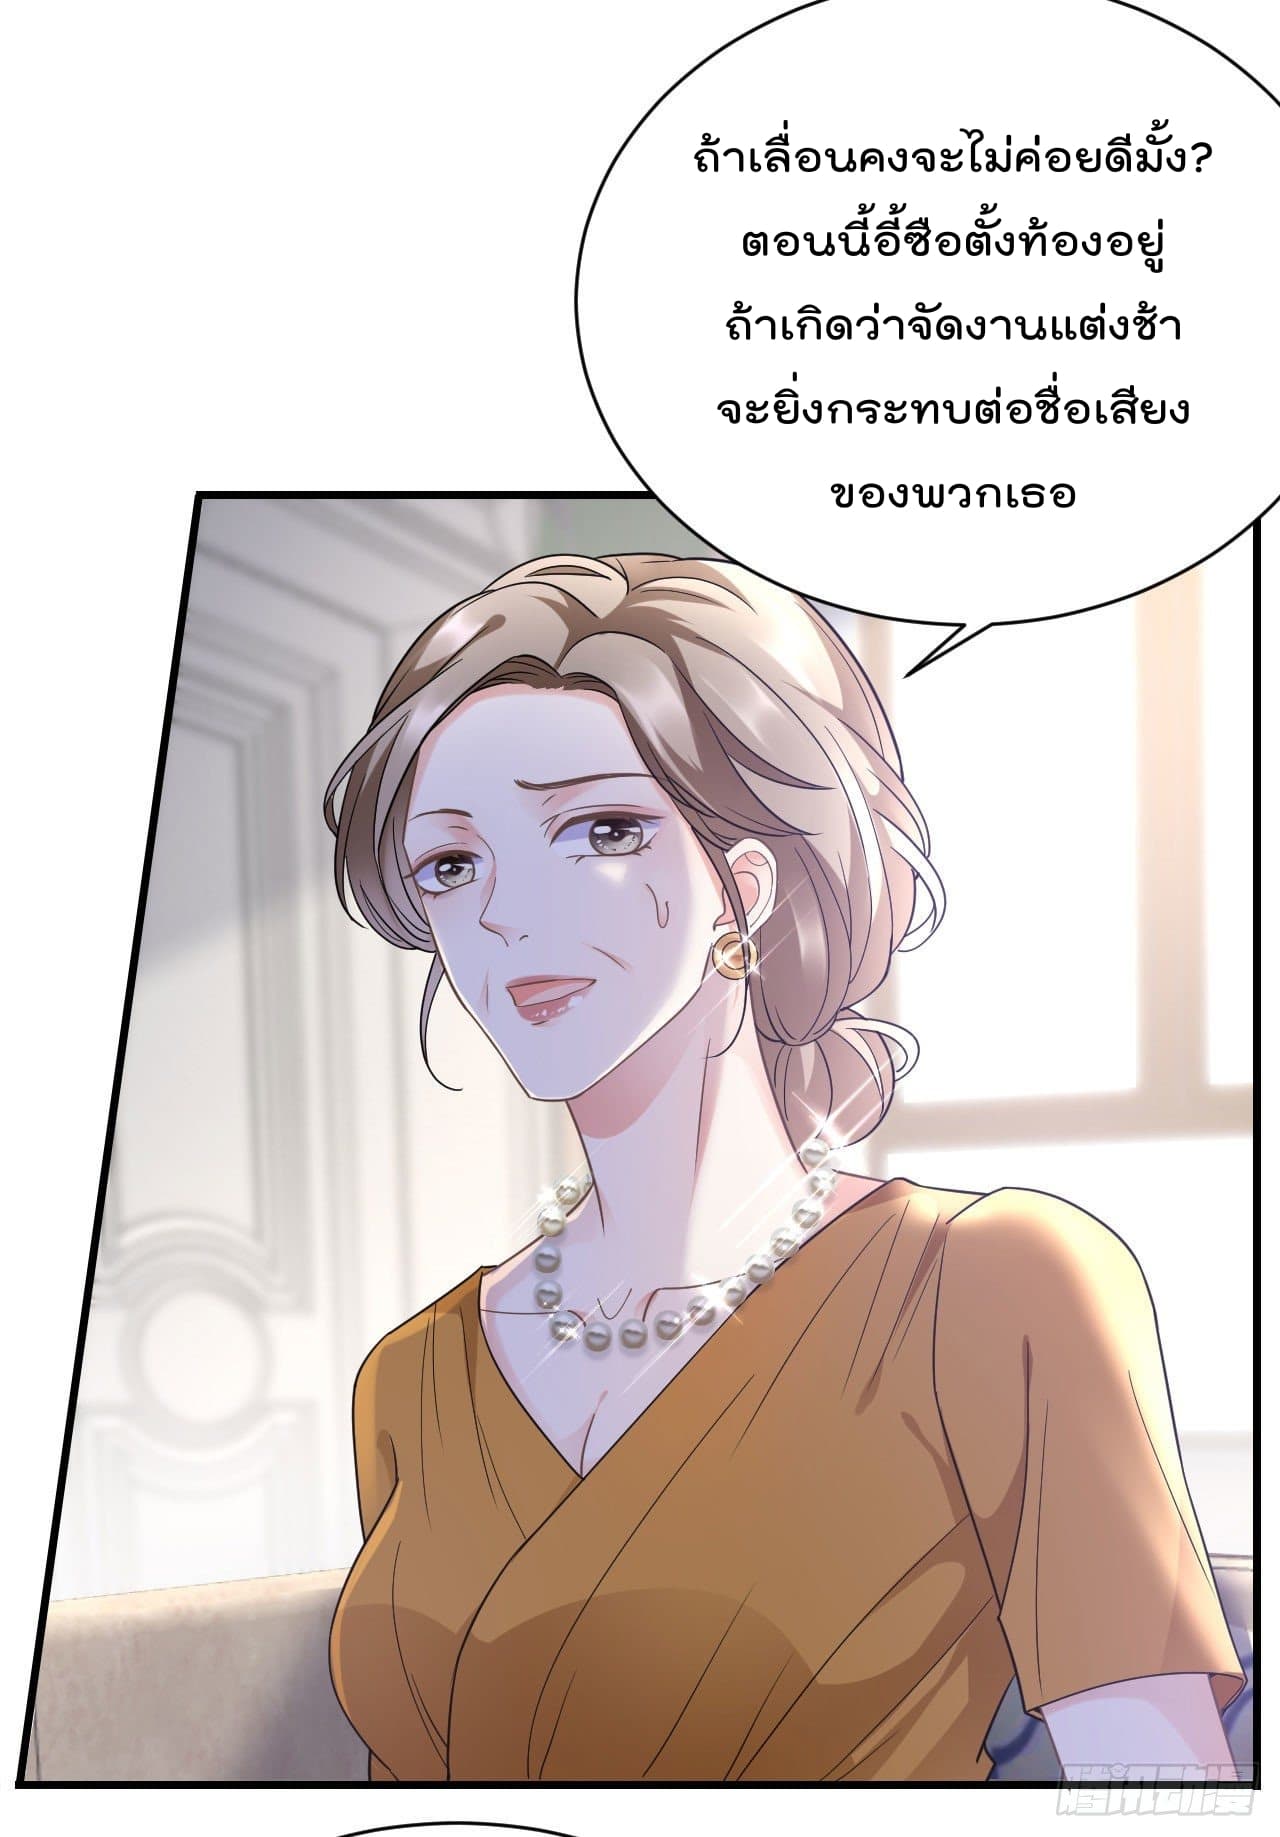 What Can the Eldest Lady Have คุณหนูใหญ่ ทำไมคุณร้ายอย่างนี้ 9-9